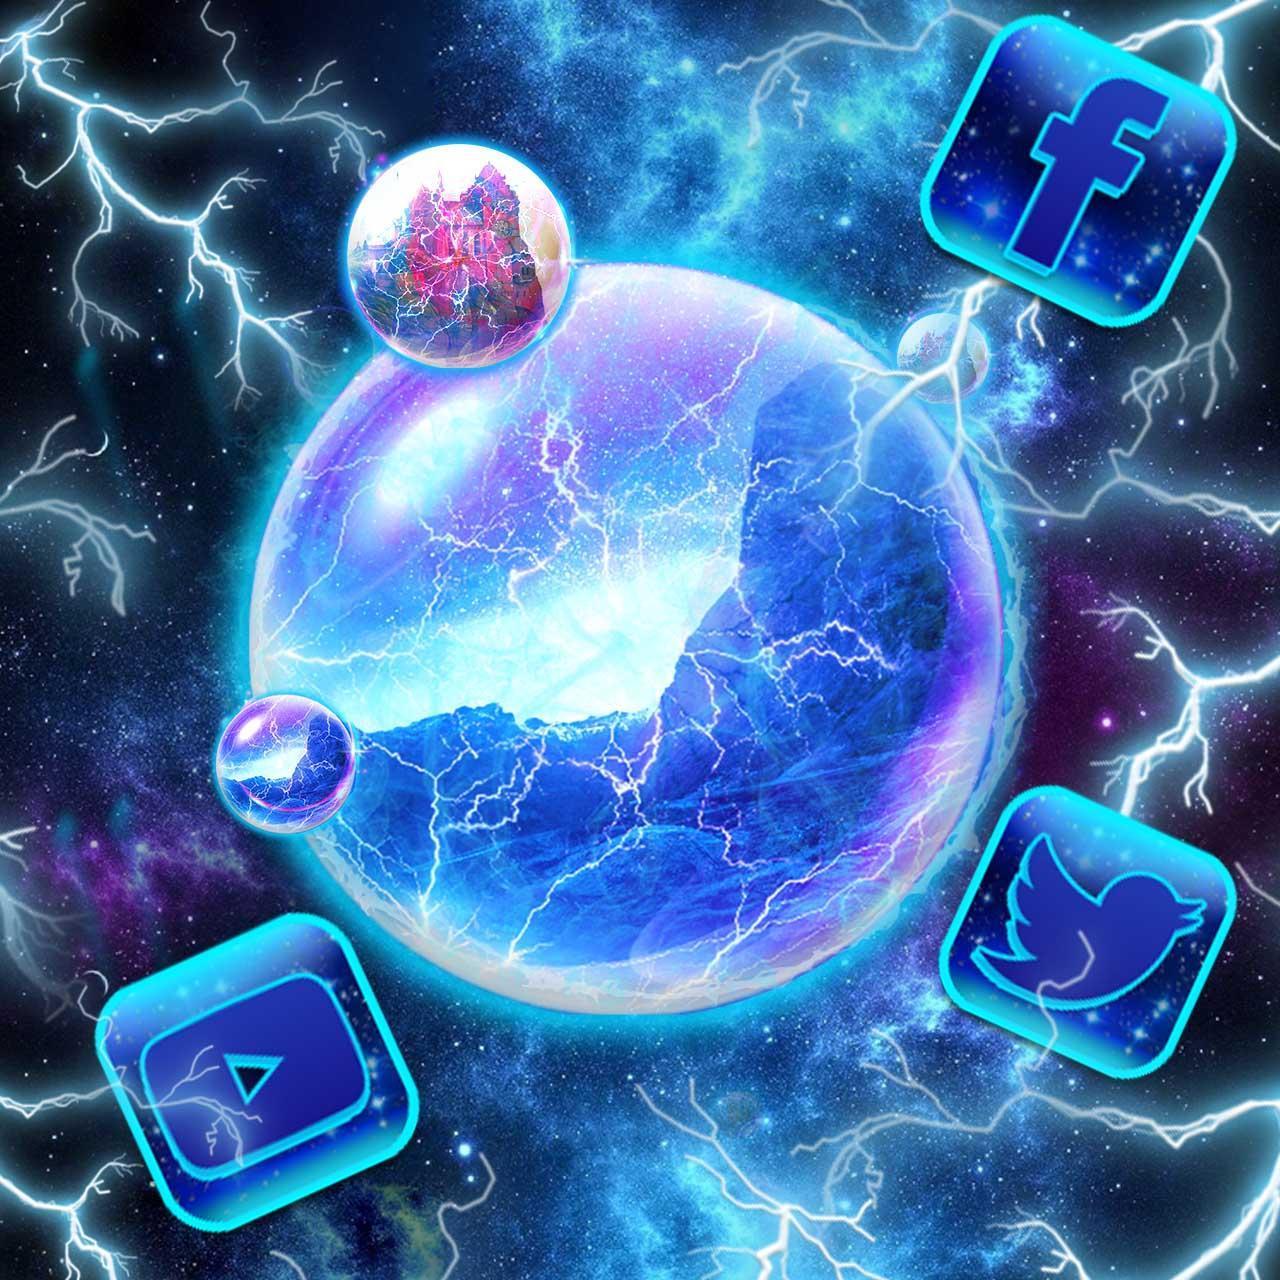 Lightning, Neon, Earth Themes & Wallpaper for Android